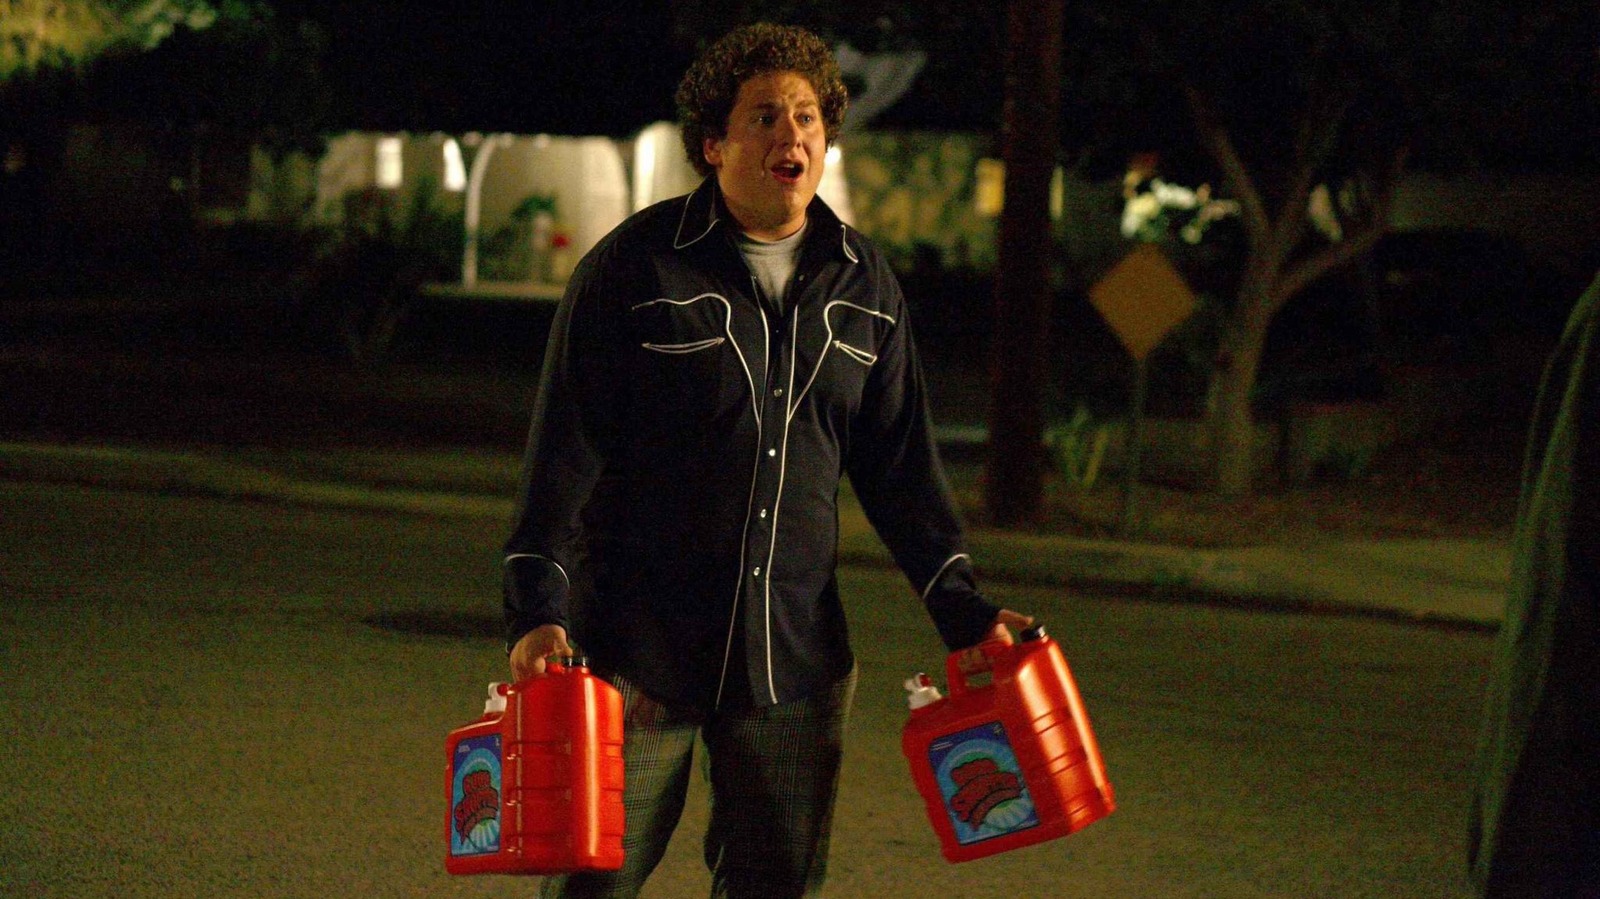 Superbad Bet Everything On The Success Of One ‘All-Or-Nothing’ Scene